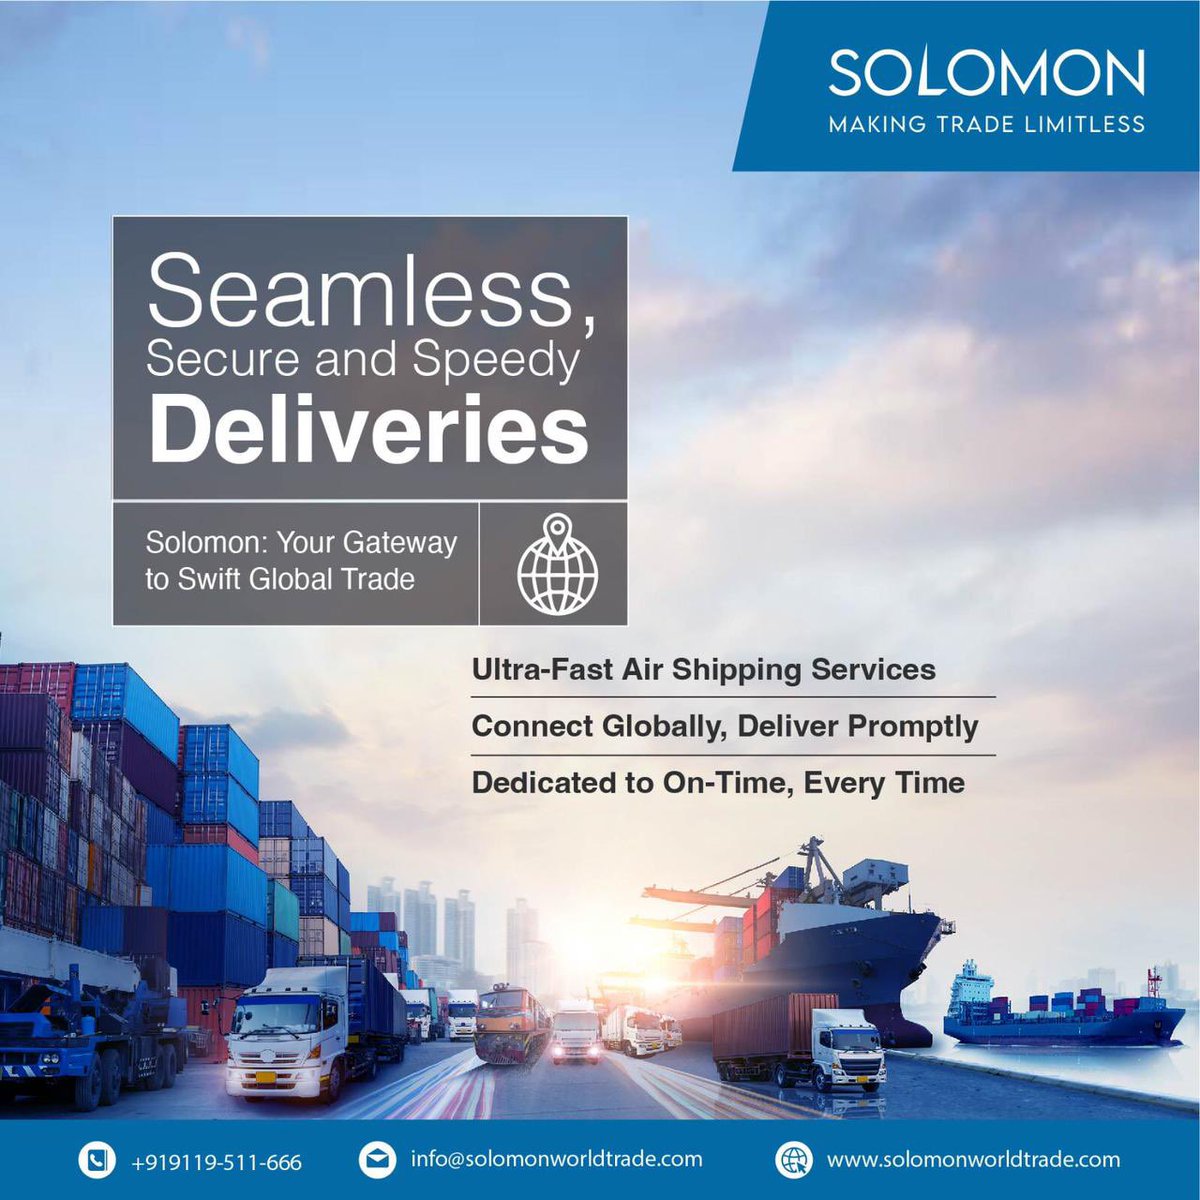 Sky-High Speed, Ground-Level Convenience ✈️

Want super fast deliveries? With Solomon, it’s possible!
We guarantee prompt deliveries that transcend boundaries, allowing our products to reach their destination with exceptional swiftness.
#SolomonTradingCompany  #ExportingWorldwide